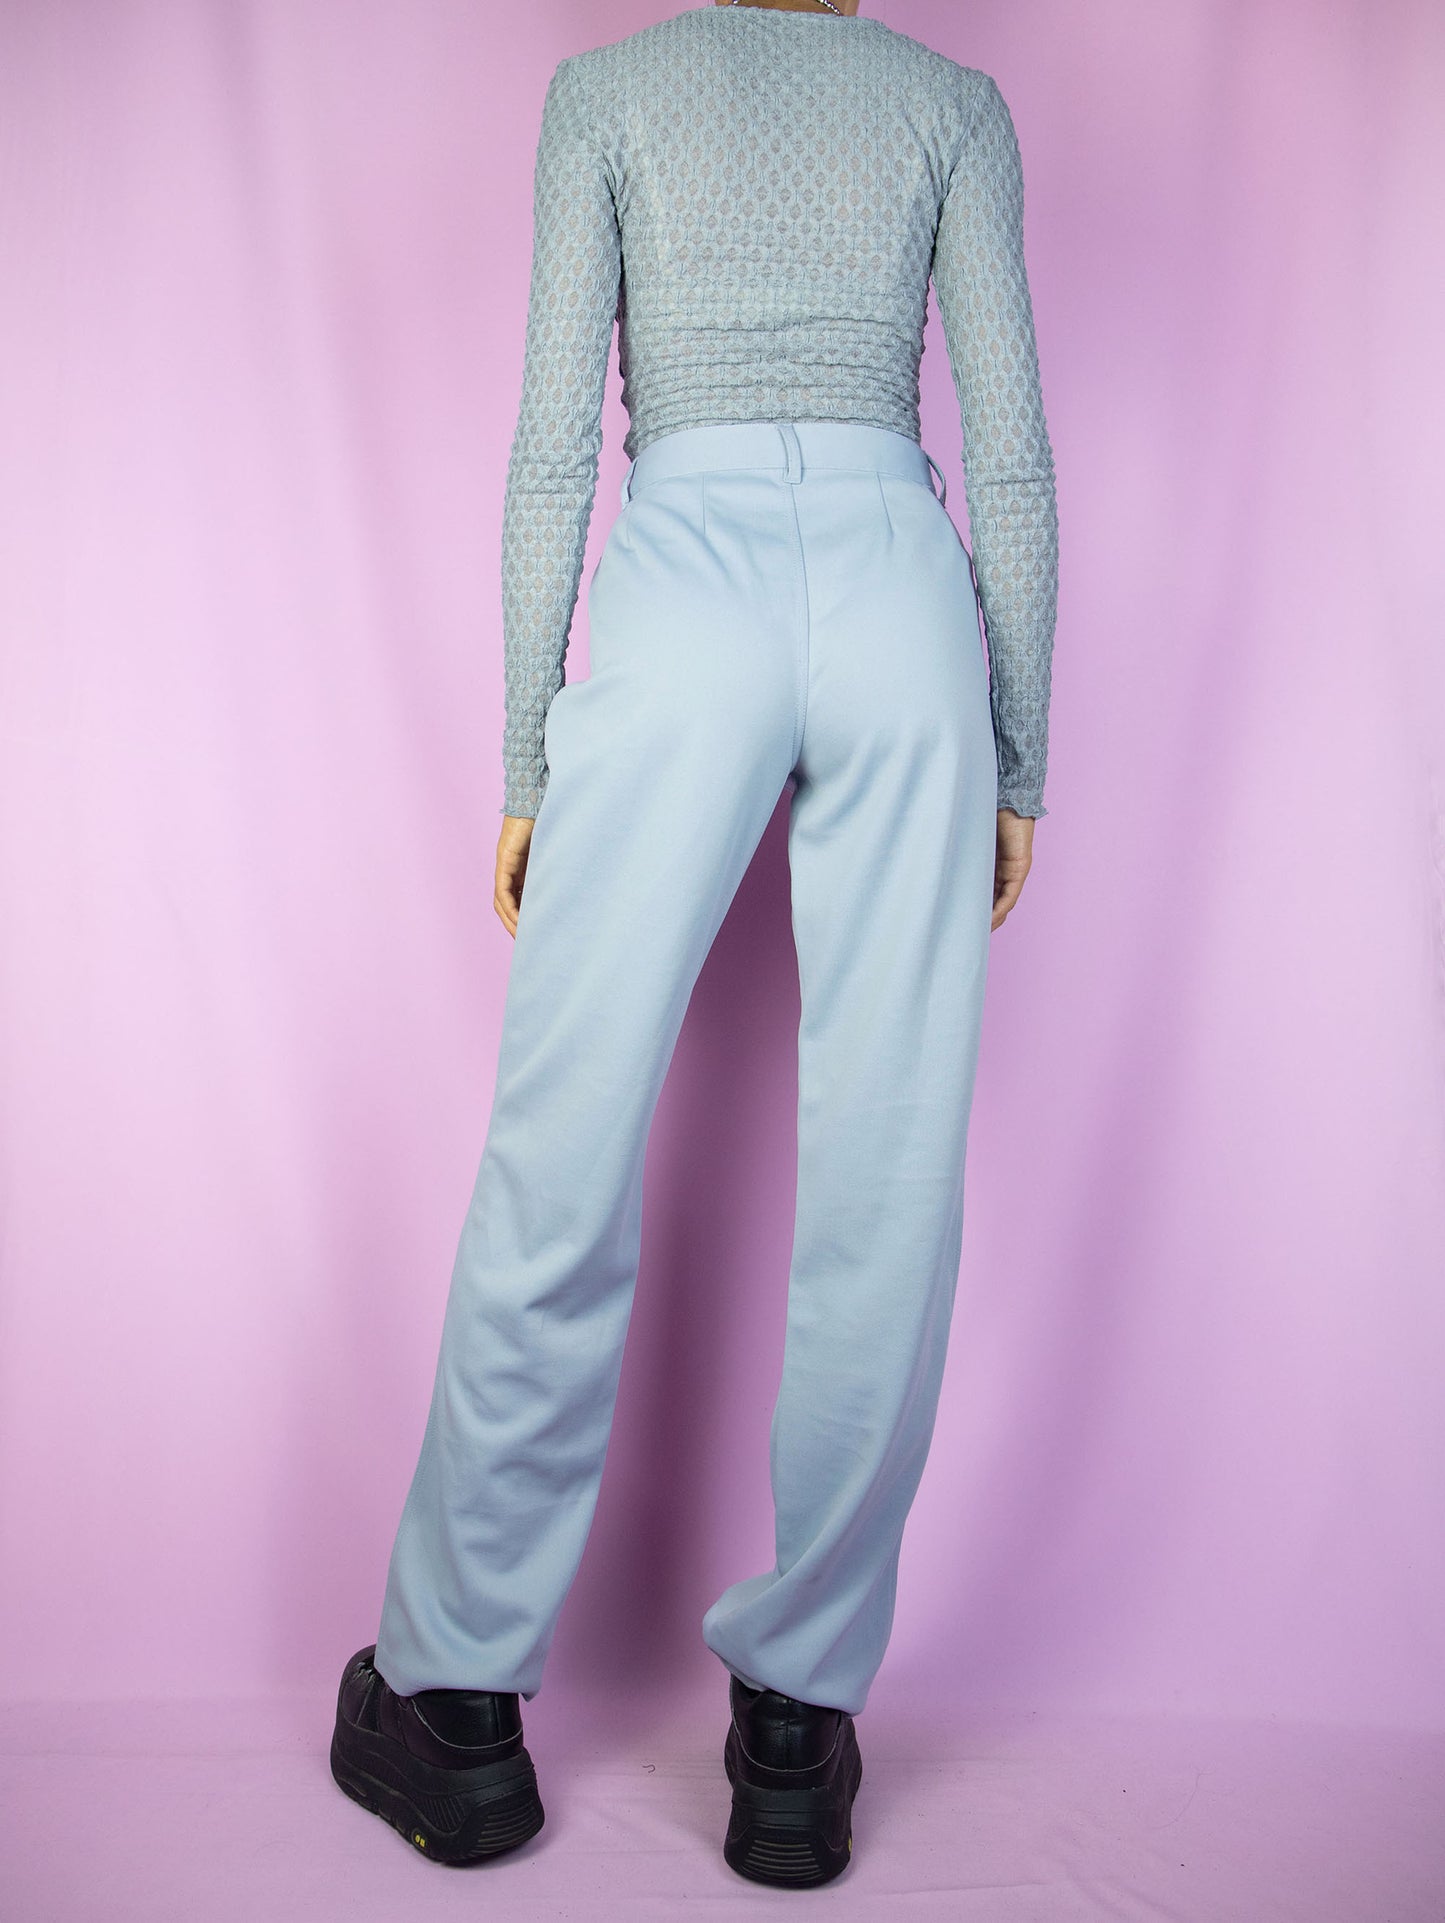 Y2K Gray Pleated Straight Pants - S/M